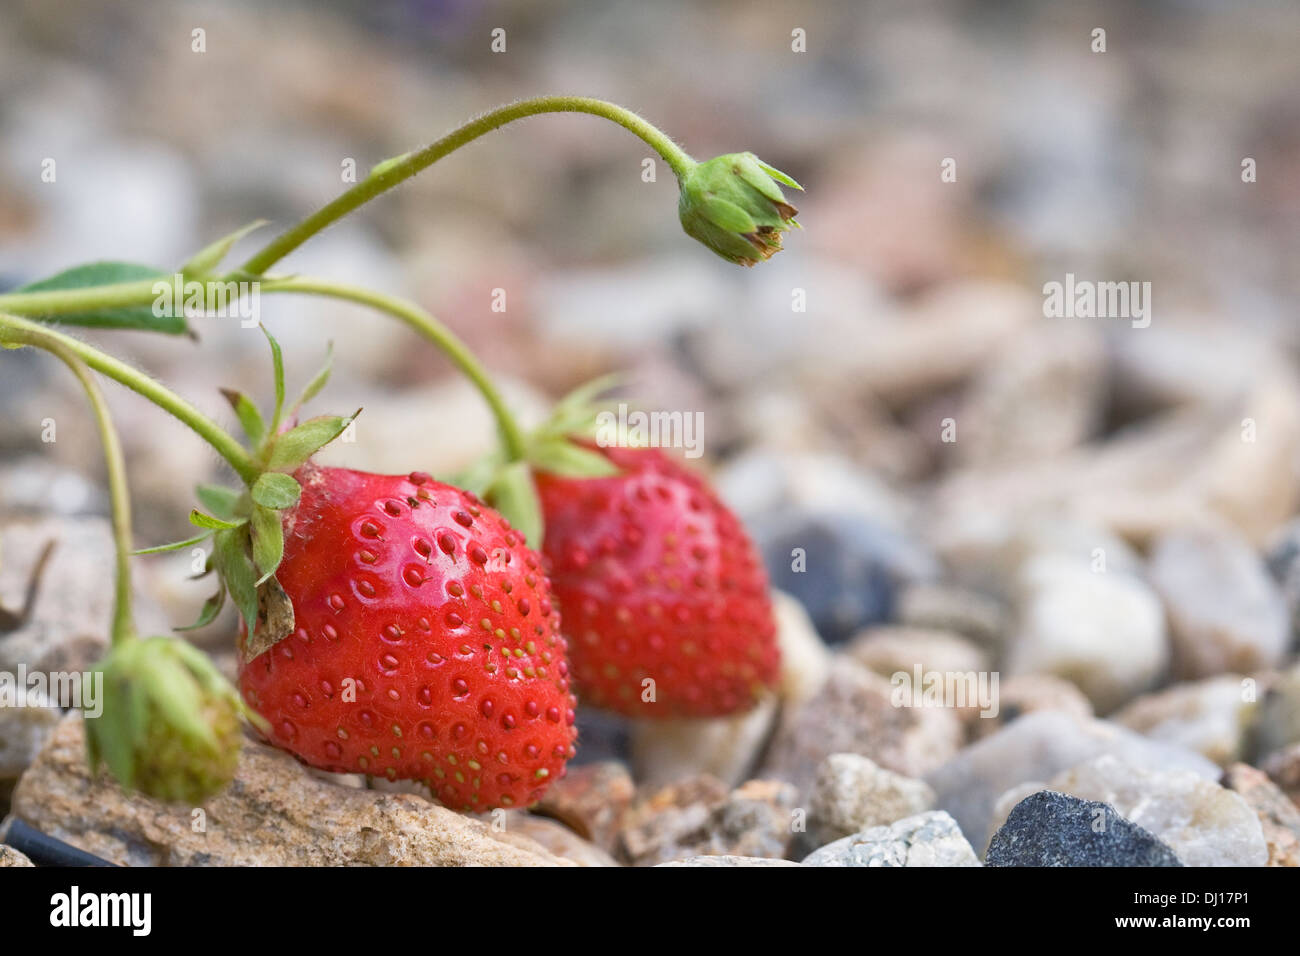 Strawberries ripening on a gravel path. Stock Photo